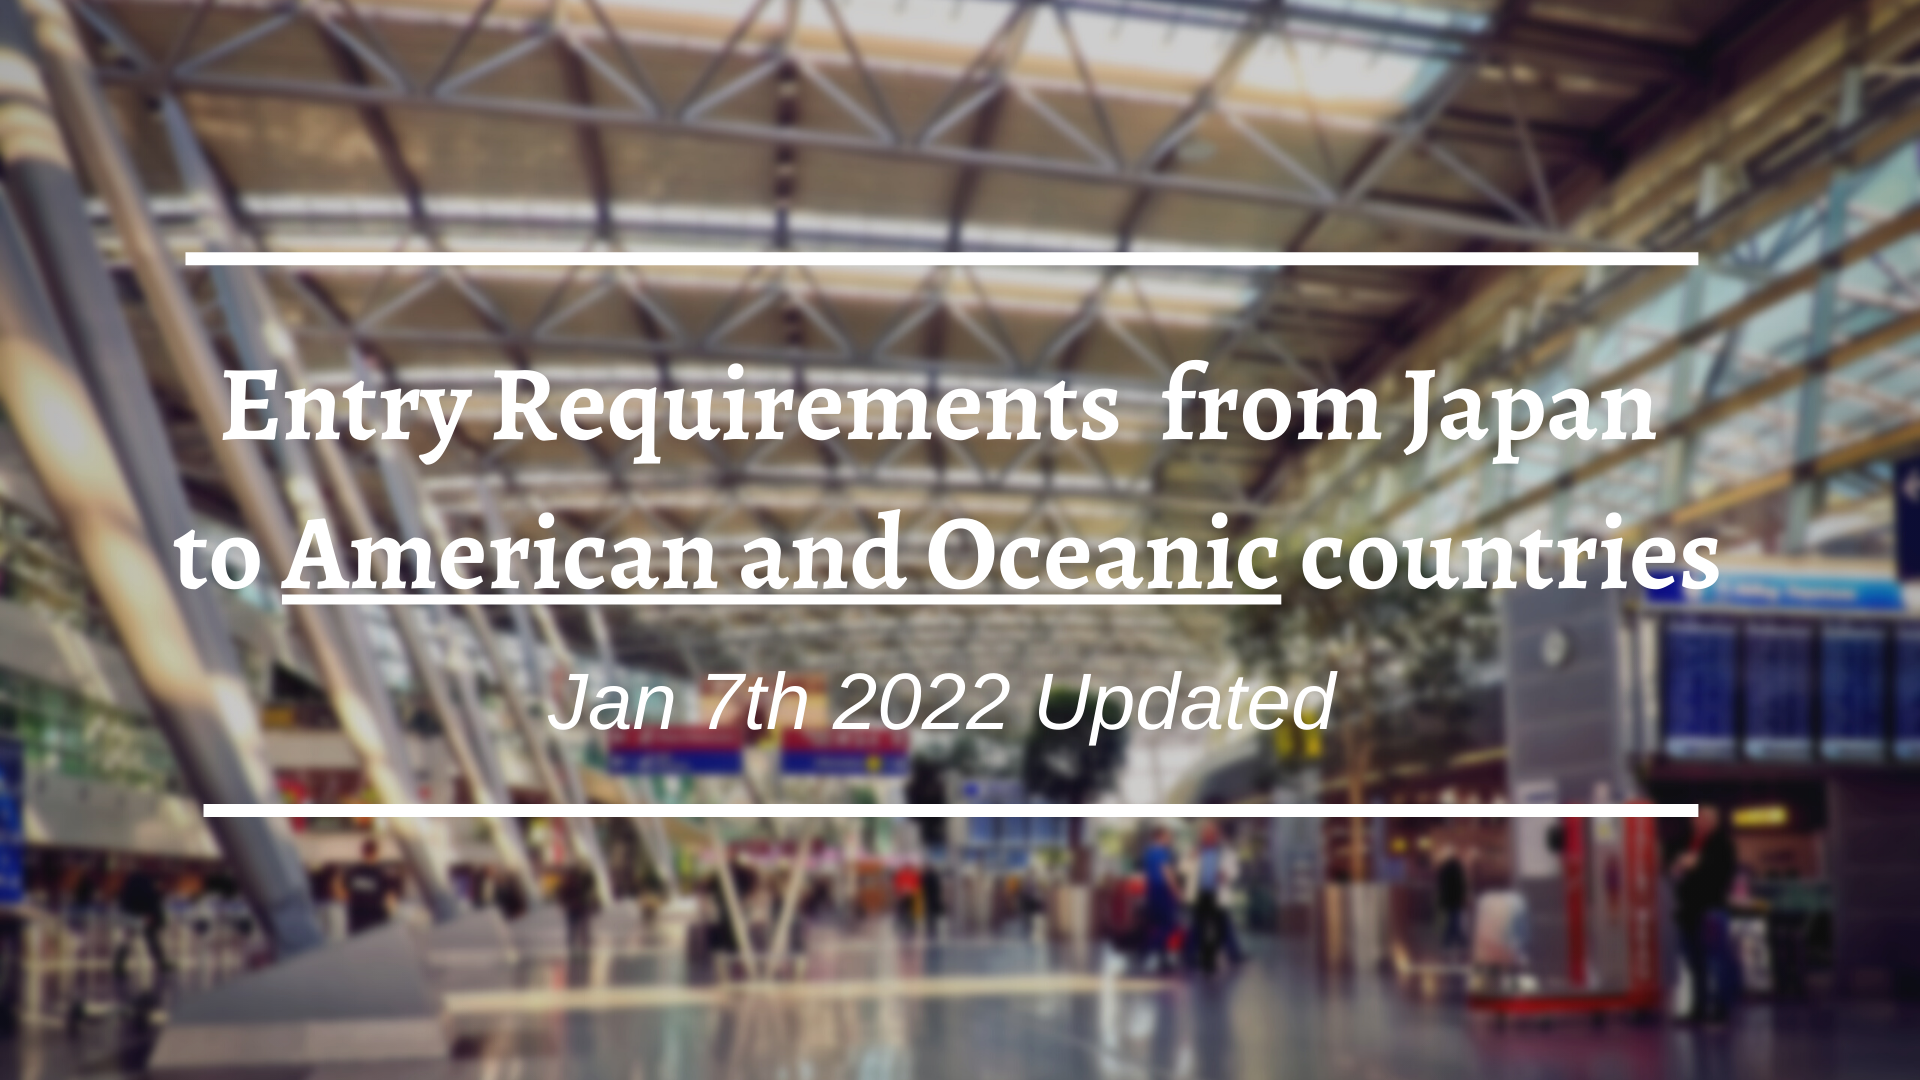 Entry Requirements from Japan to American and Oceanic countries